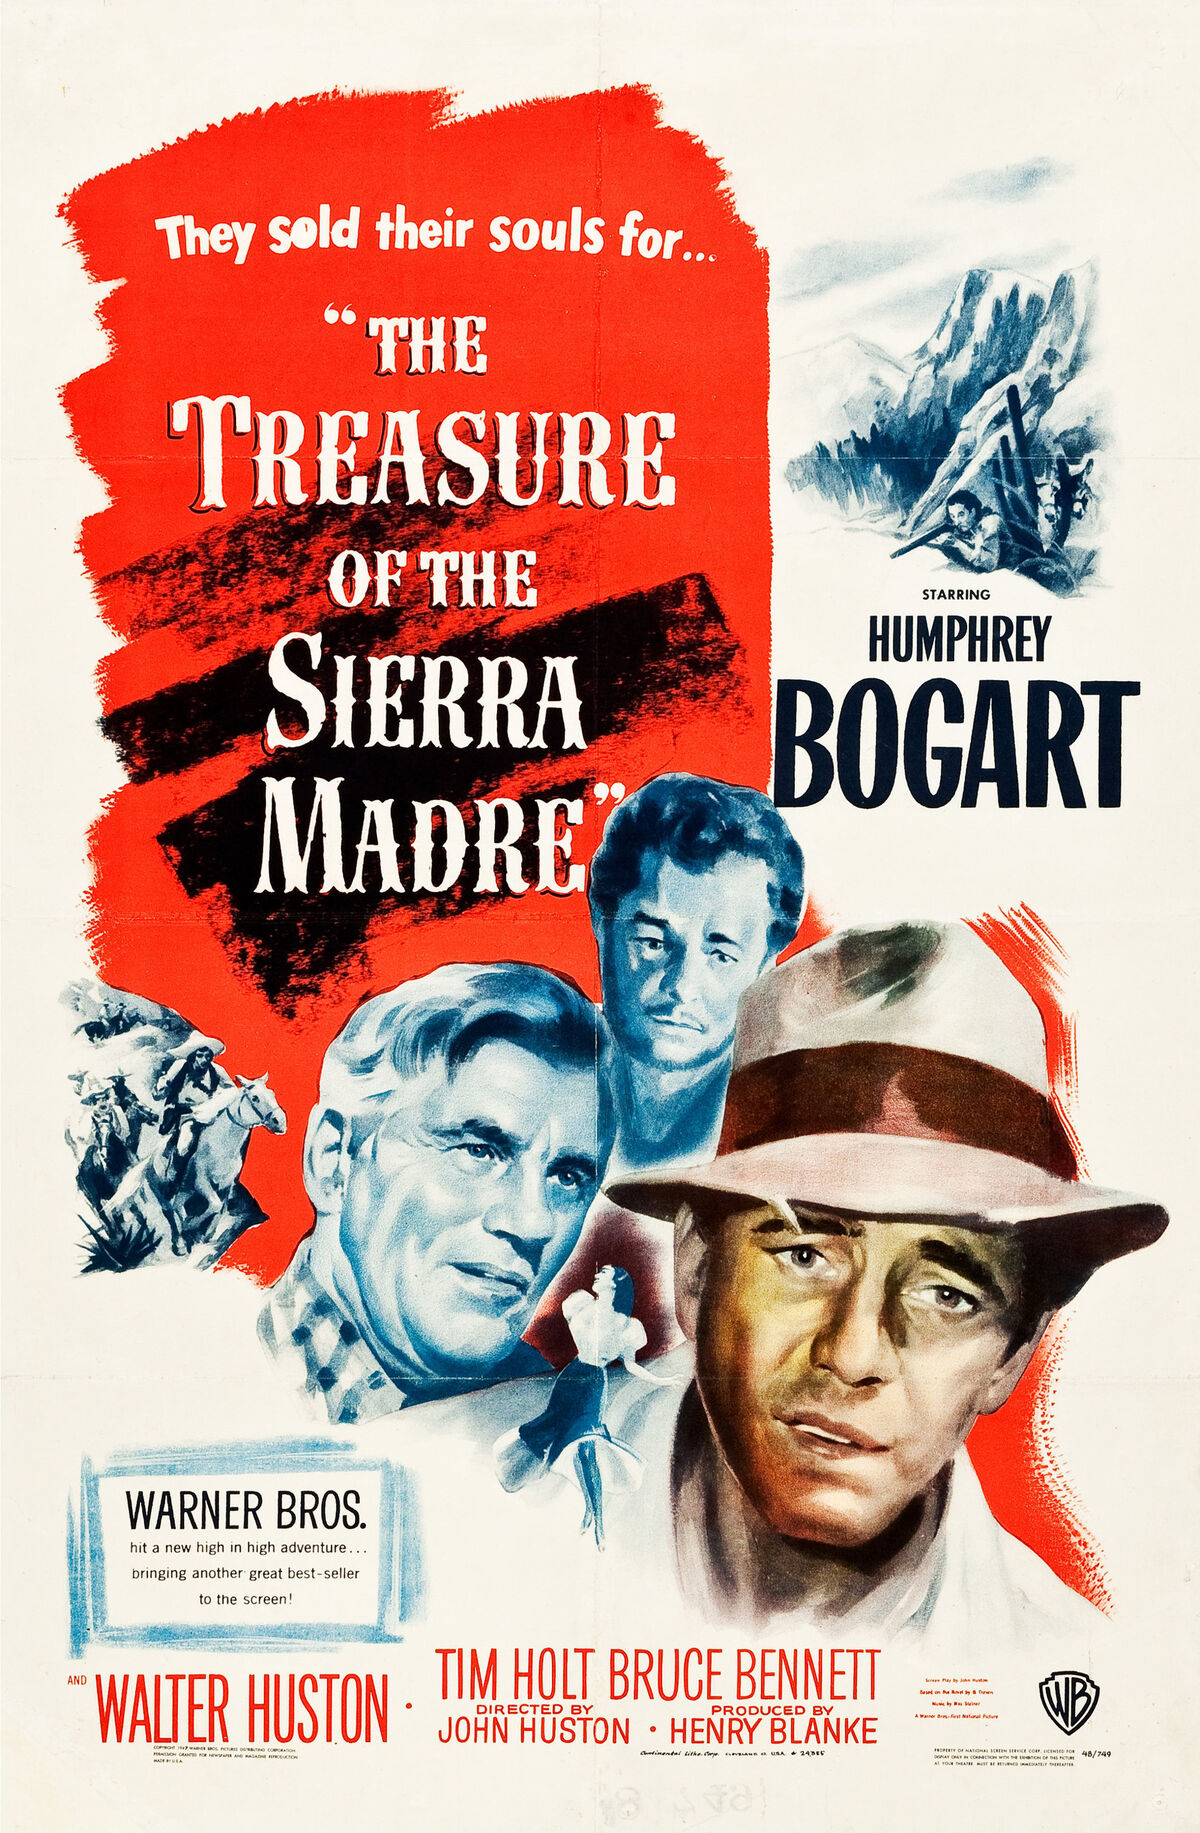 https://static.wikia.nocookie.net/warner-bros-entertainment/images/1/1d/The_Treasure_of_the_Sierra_Madre_%281947_poster%29.jpg/revision/latest/scale-to-width-down/1200?cb=20200823190555